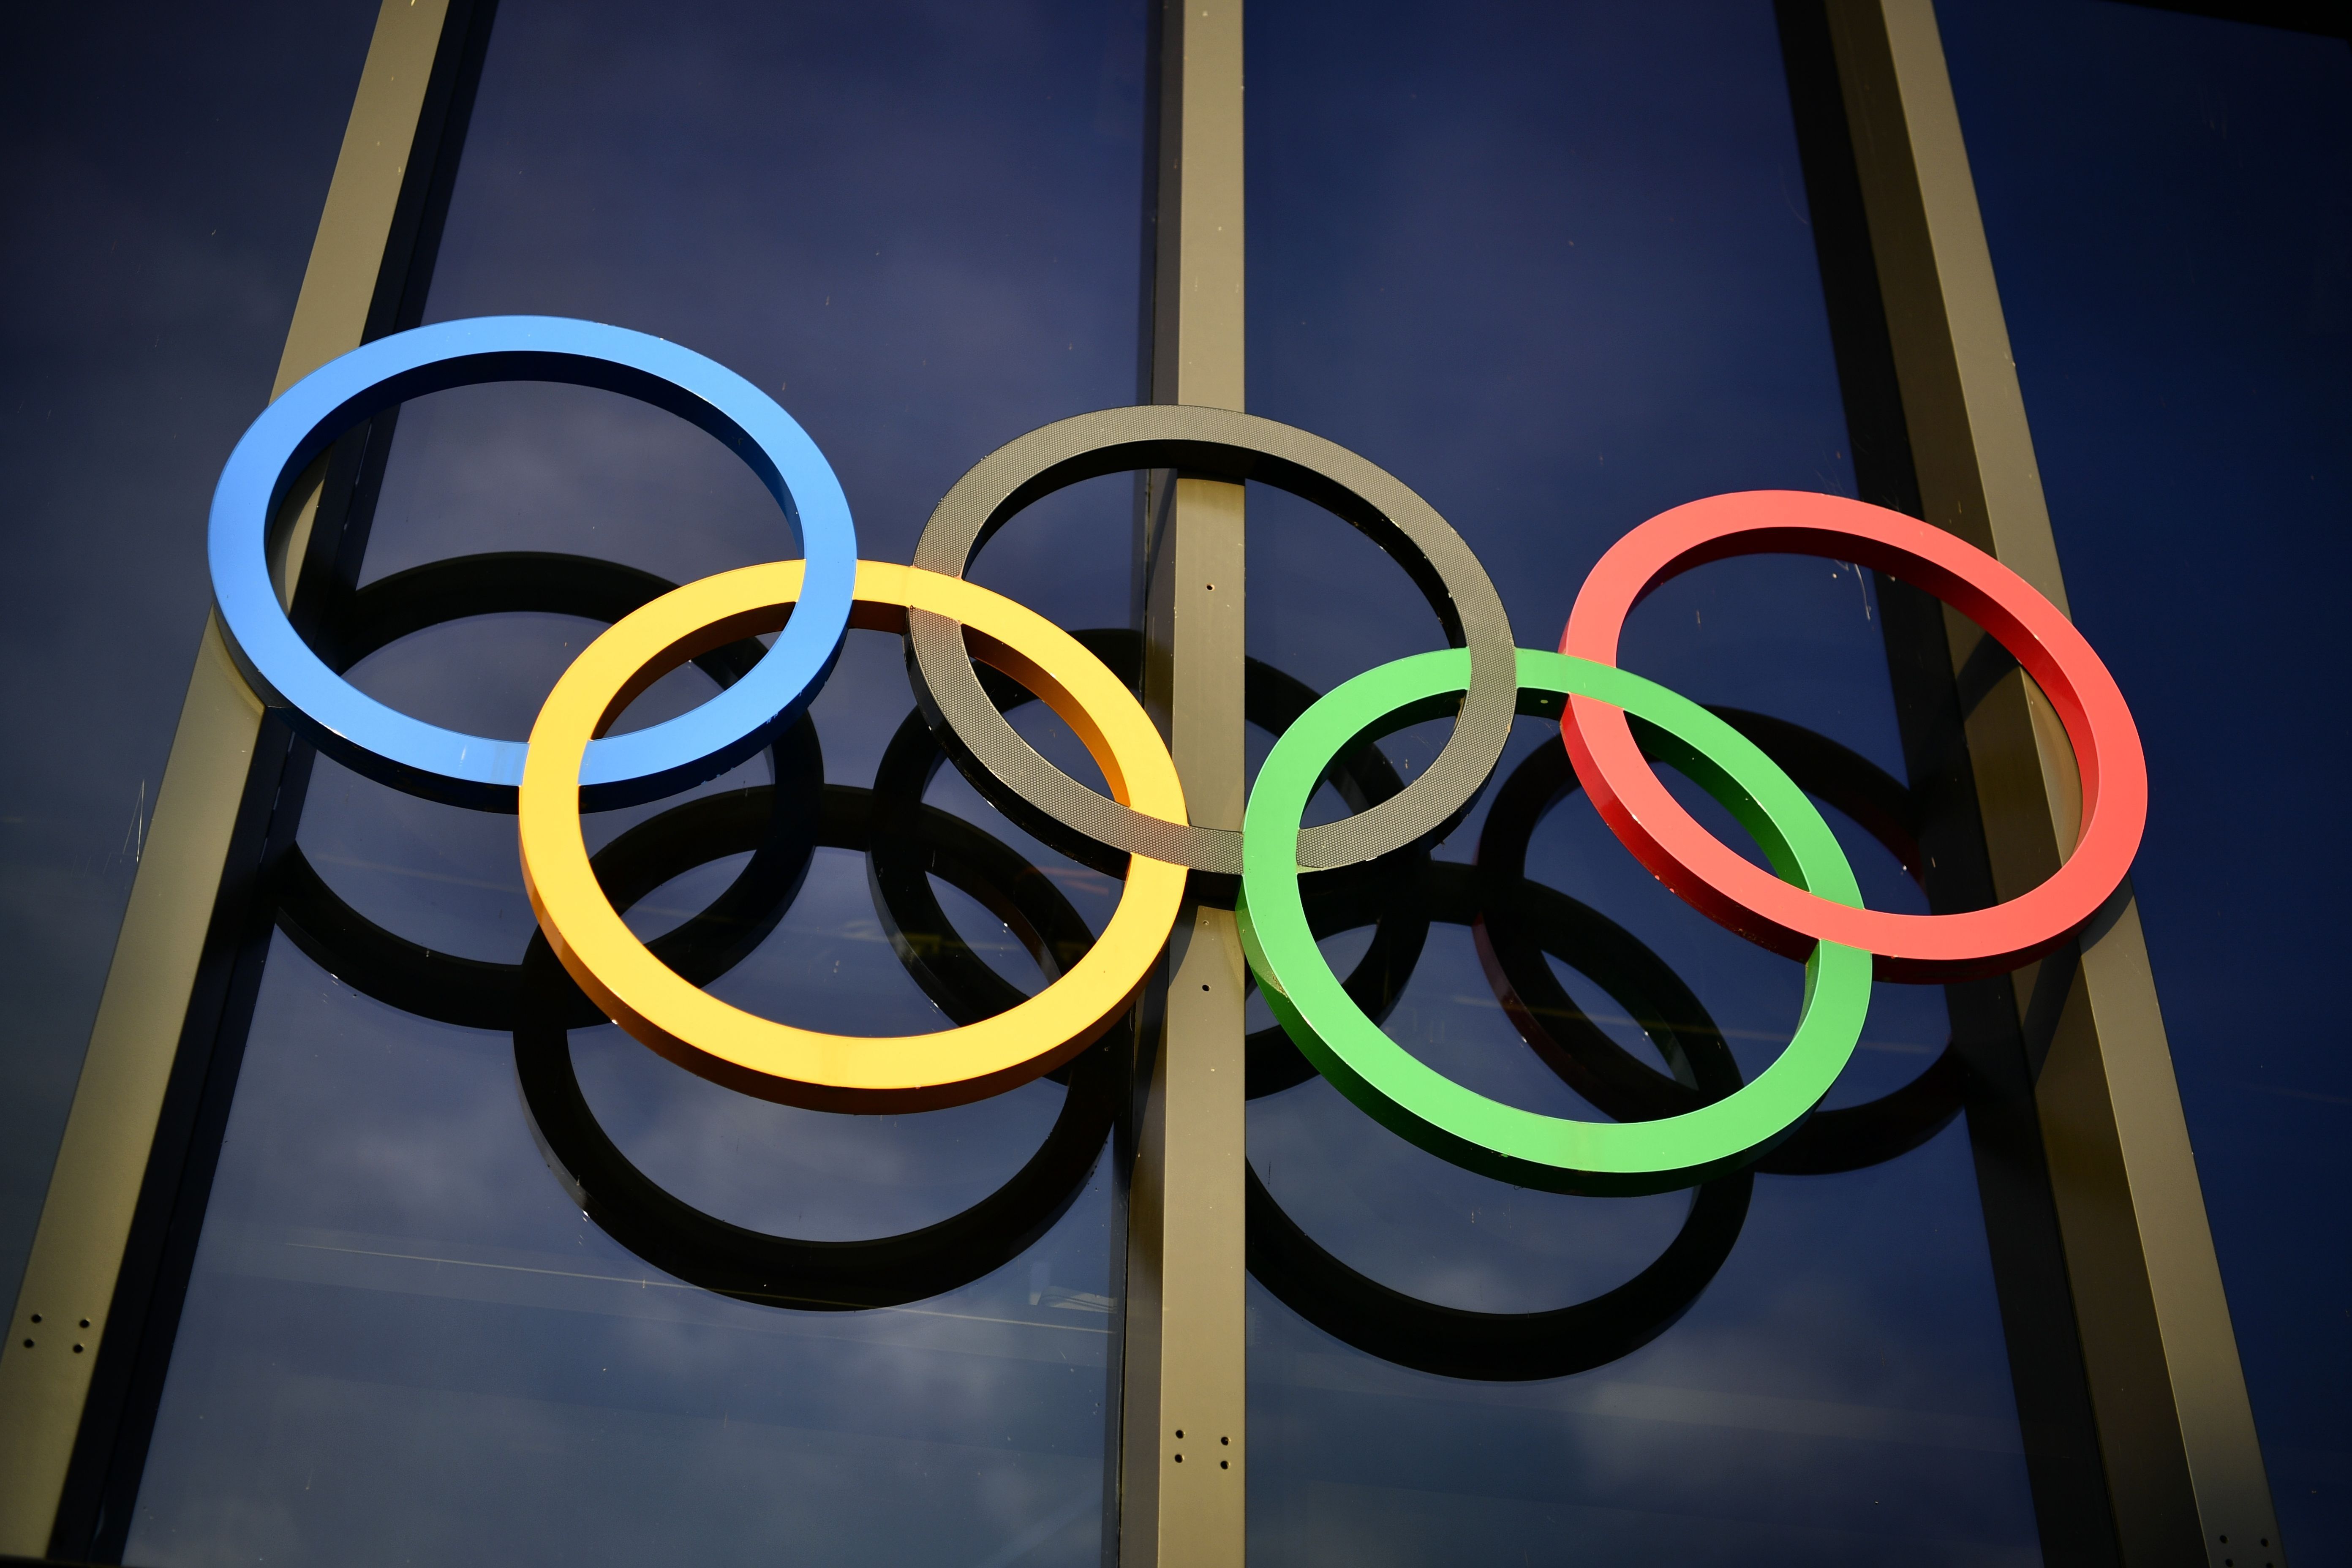 Los Angeles, Paris Final Potential Host Cities for 2024 Olympics